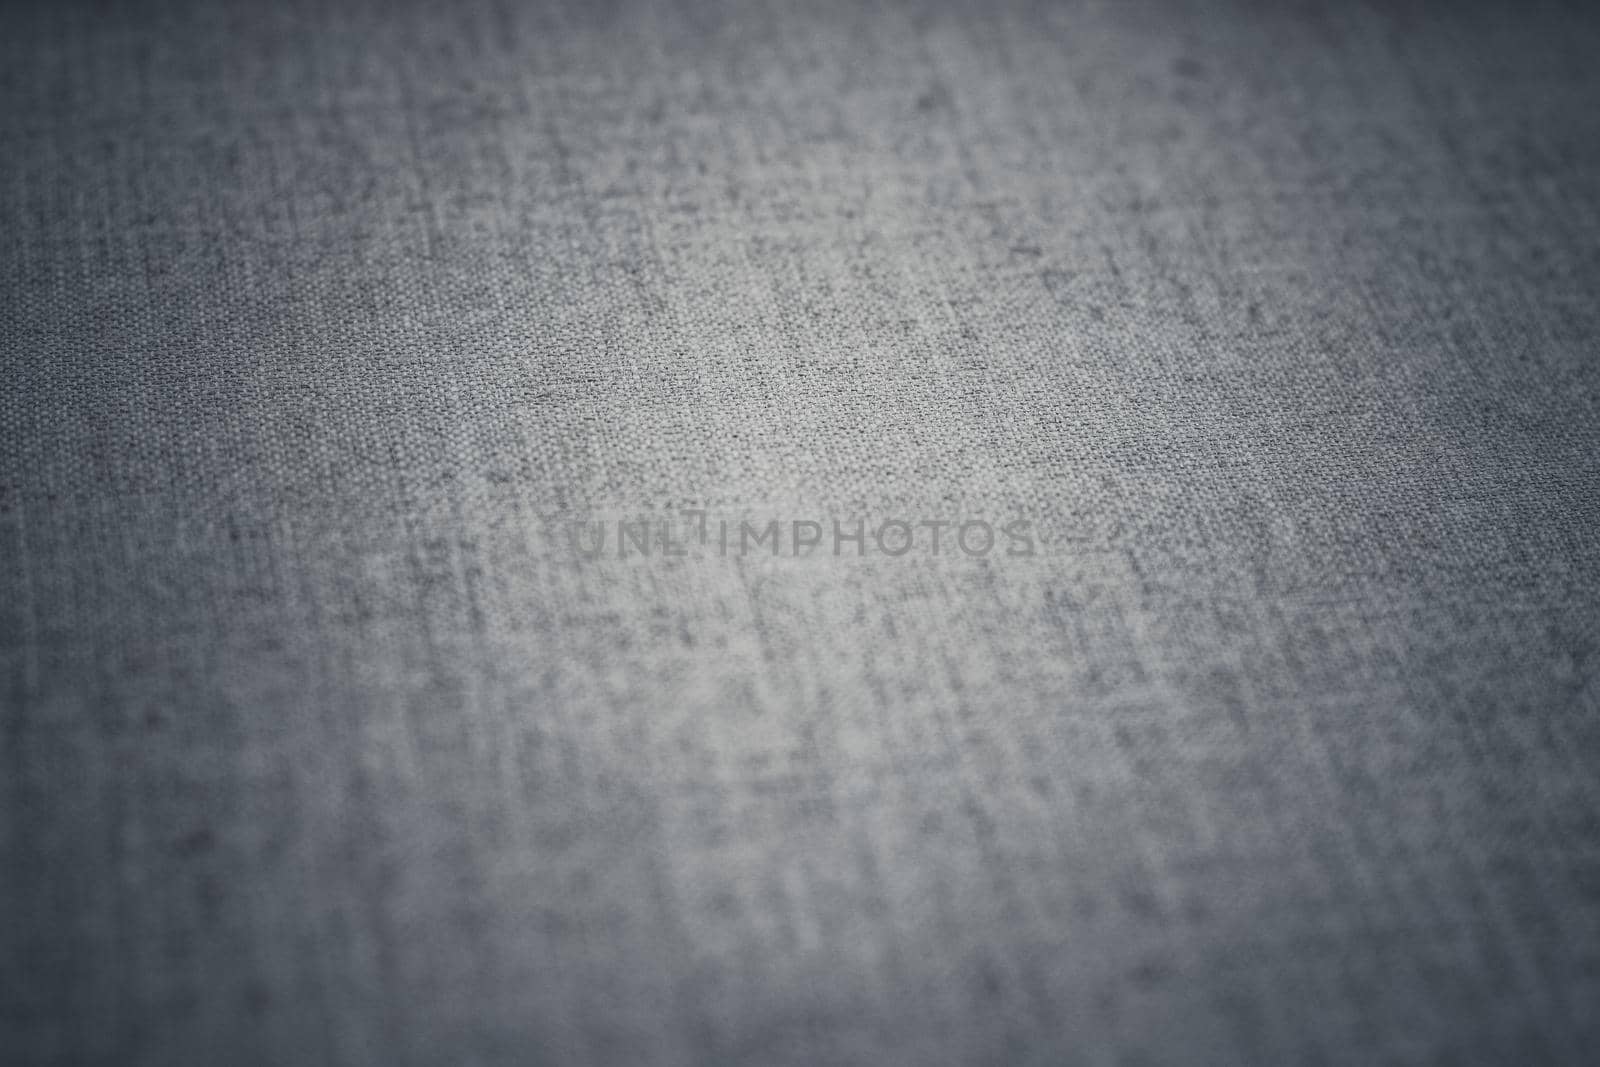 Textile material, natural surface and vintage decor texture concept - Decorative gray linen fabric textured background for interior, furniture design and art canvas backdrop